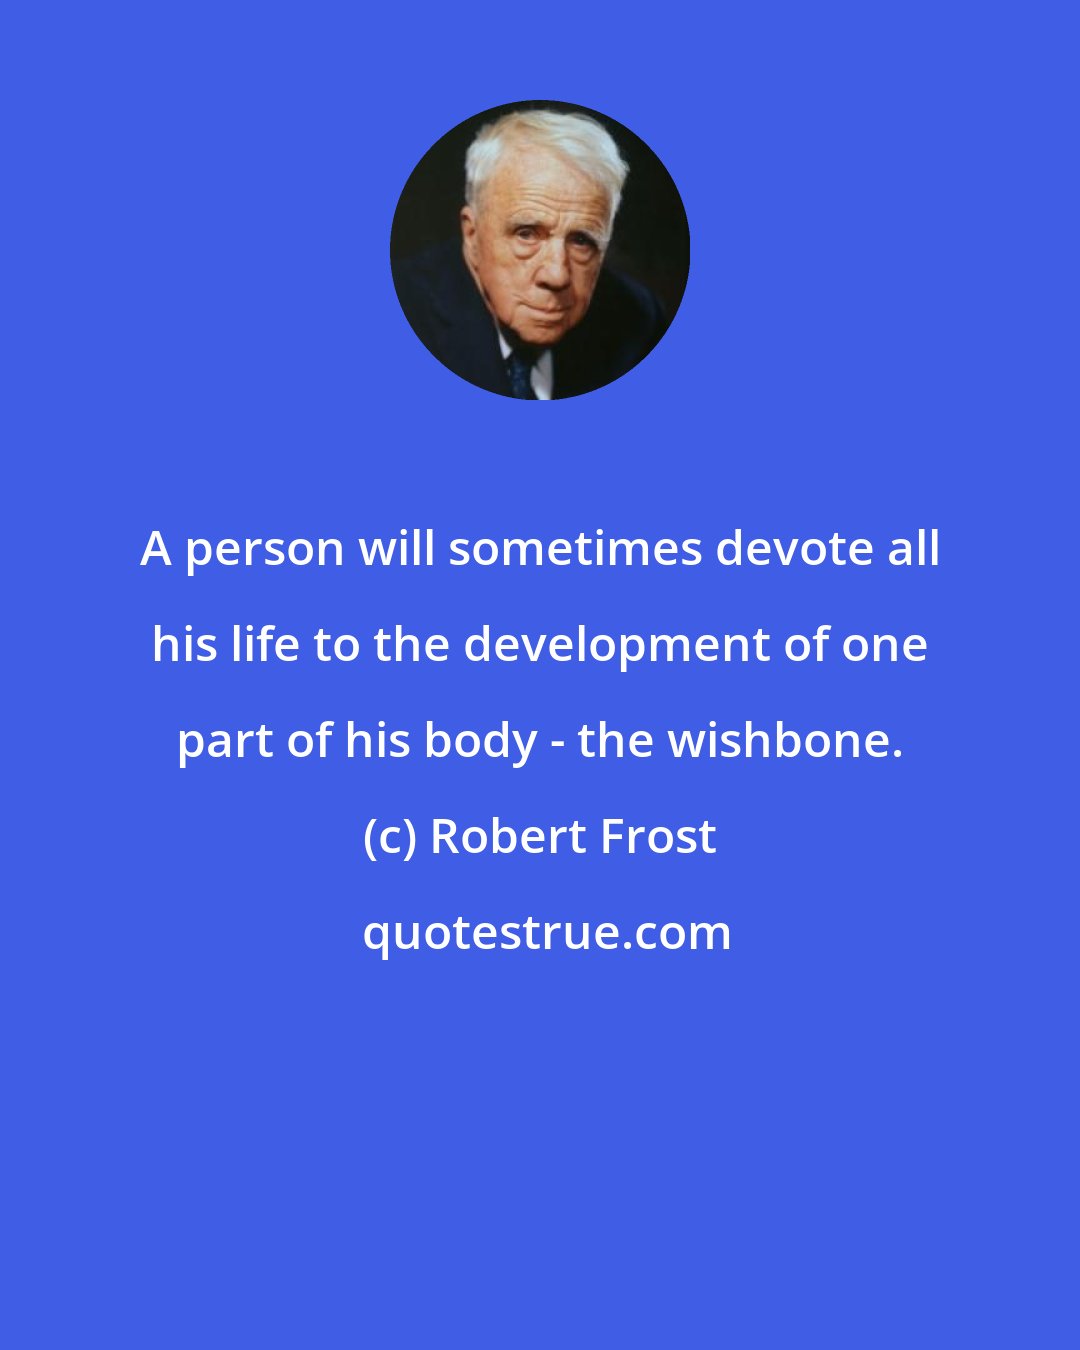 Robert Frost: A person will sometimes devote all his life to the development of one part of his body - the wishbone.